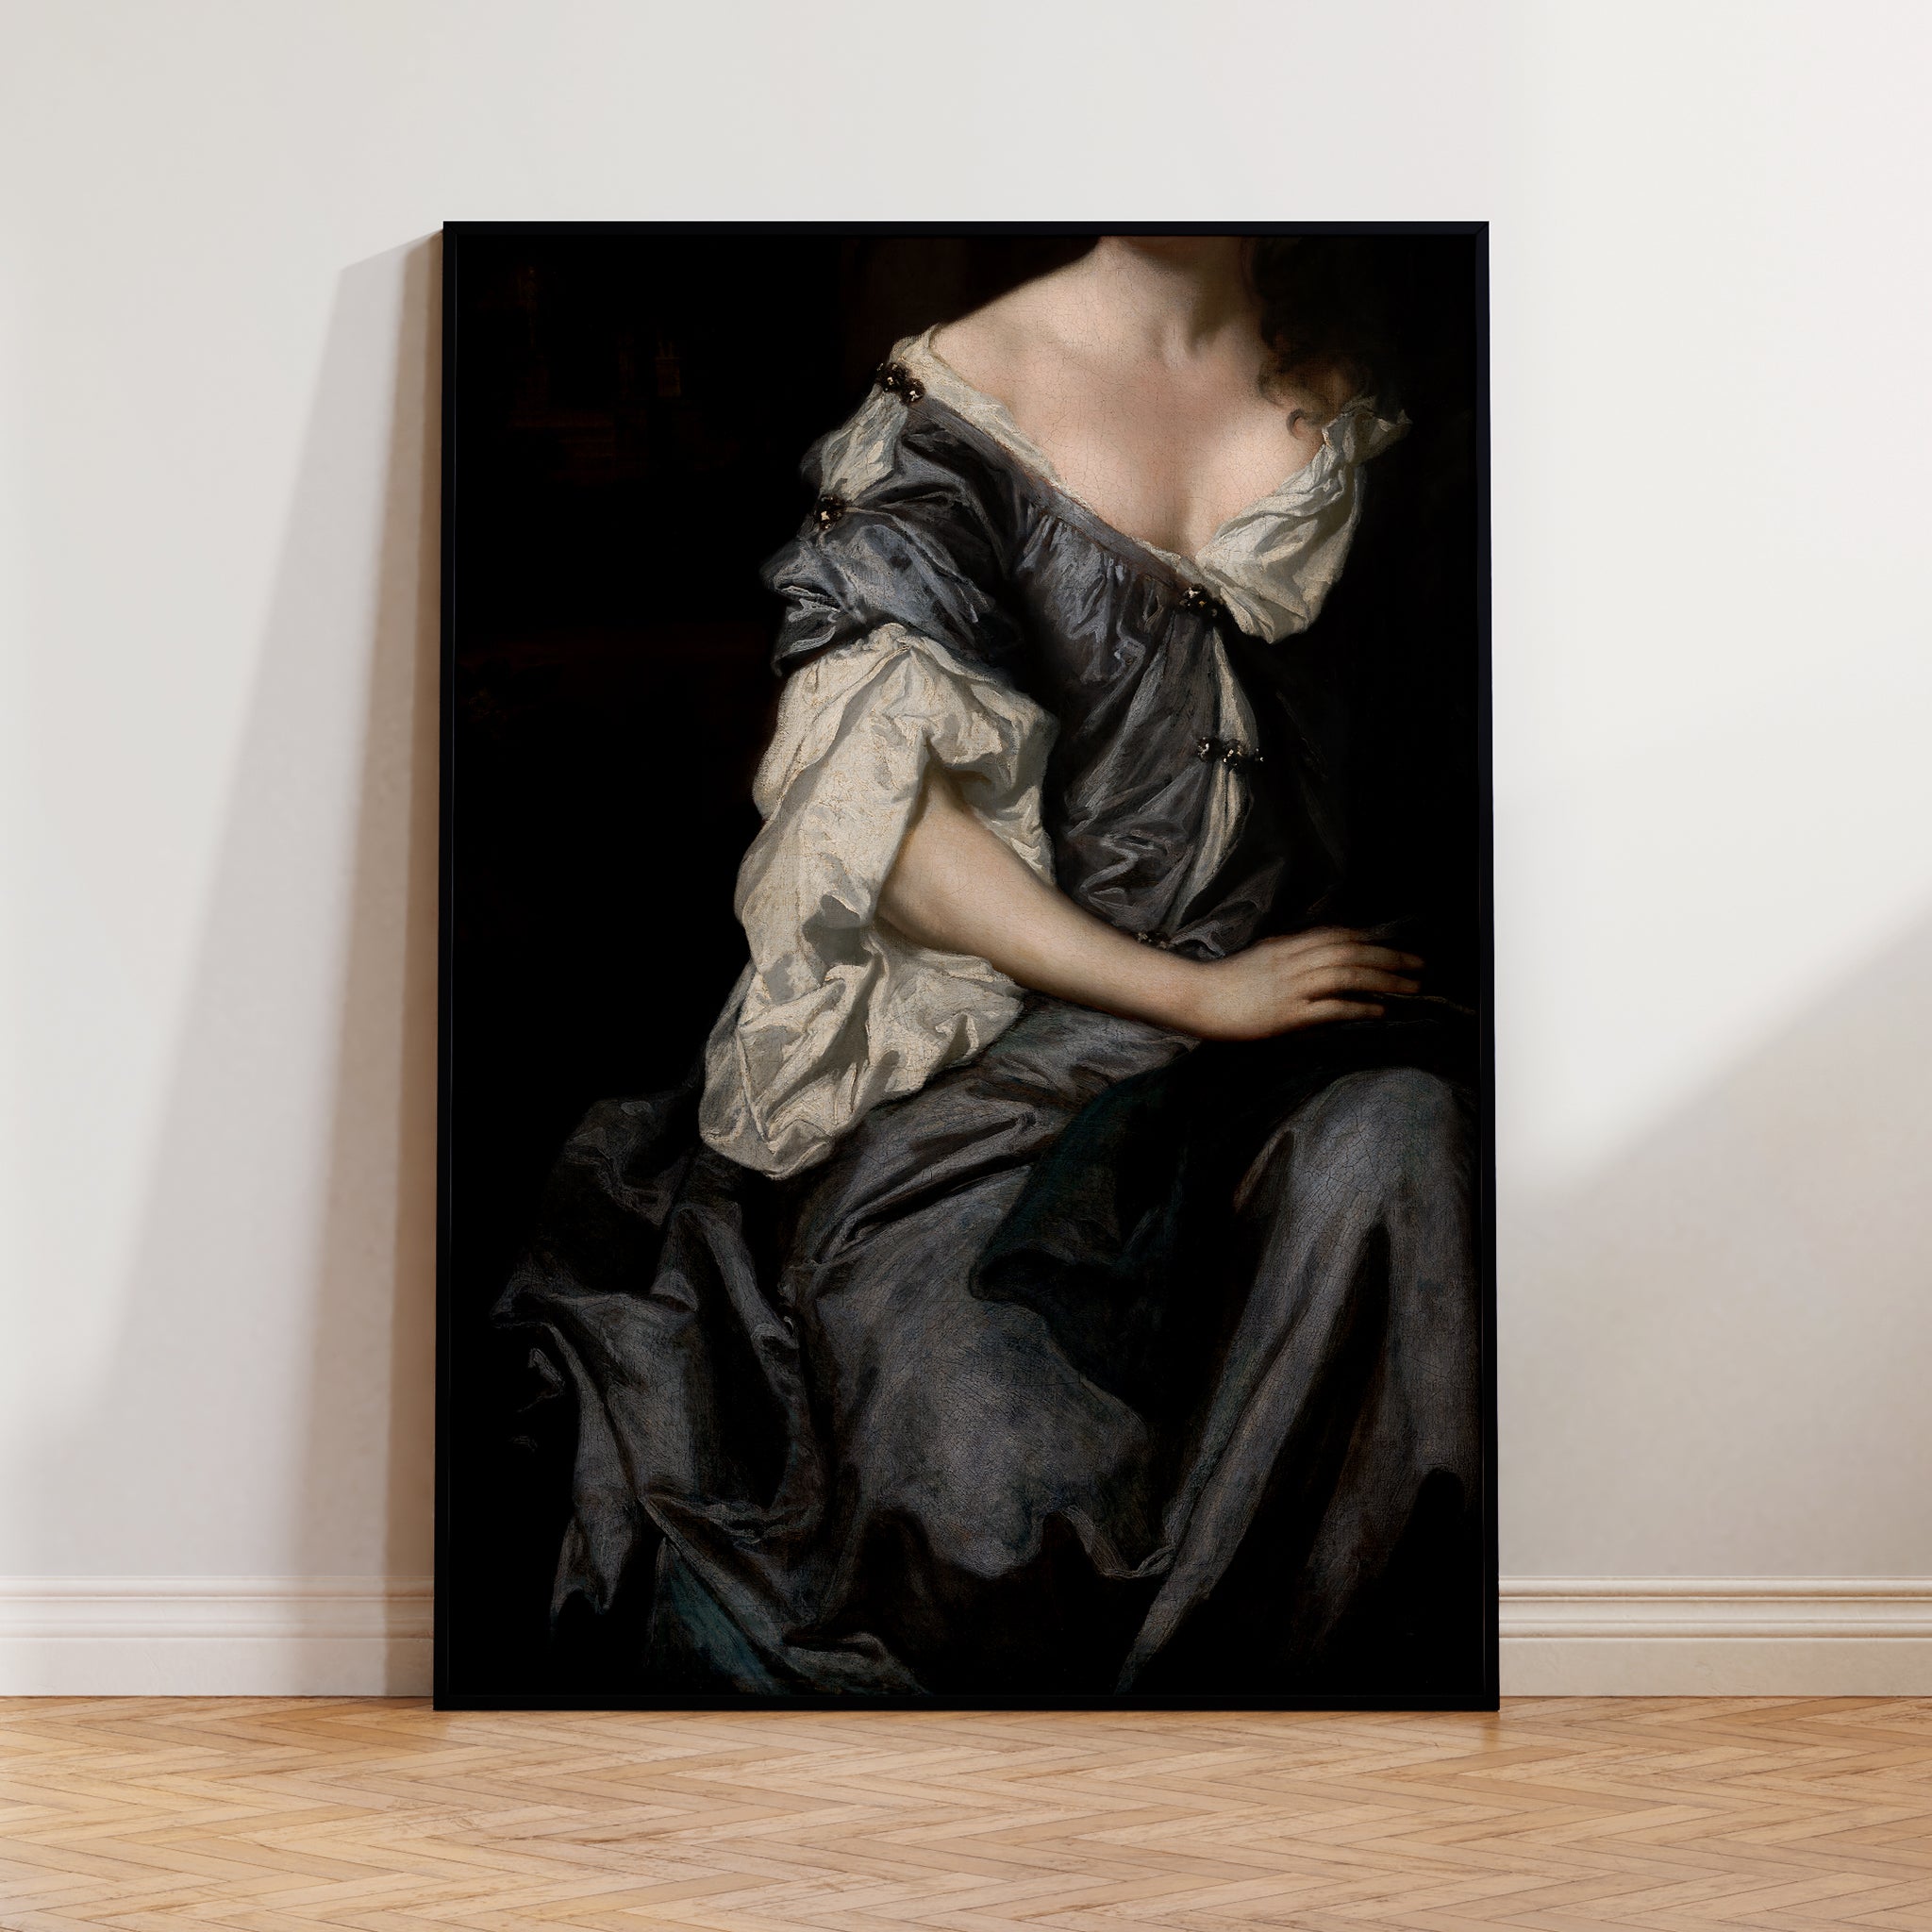 Be inspired by our altered Victorian Woman in Gray Satin Dress art print. This artwork was printed using the giclée process on archival acid-free paper and is presented in a modern black frame that captures its timeless beauty in every detail.